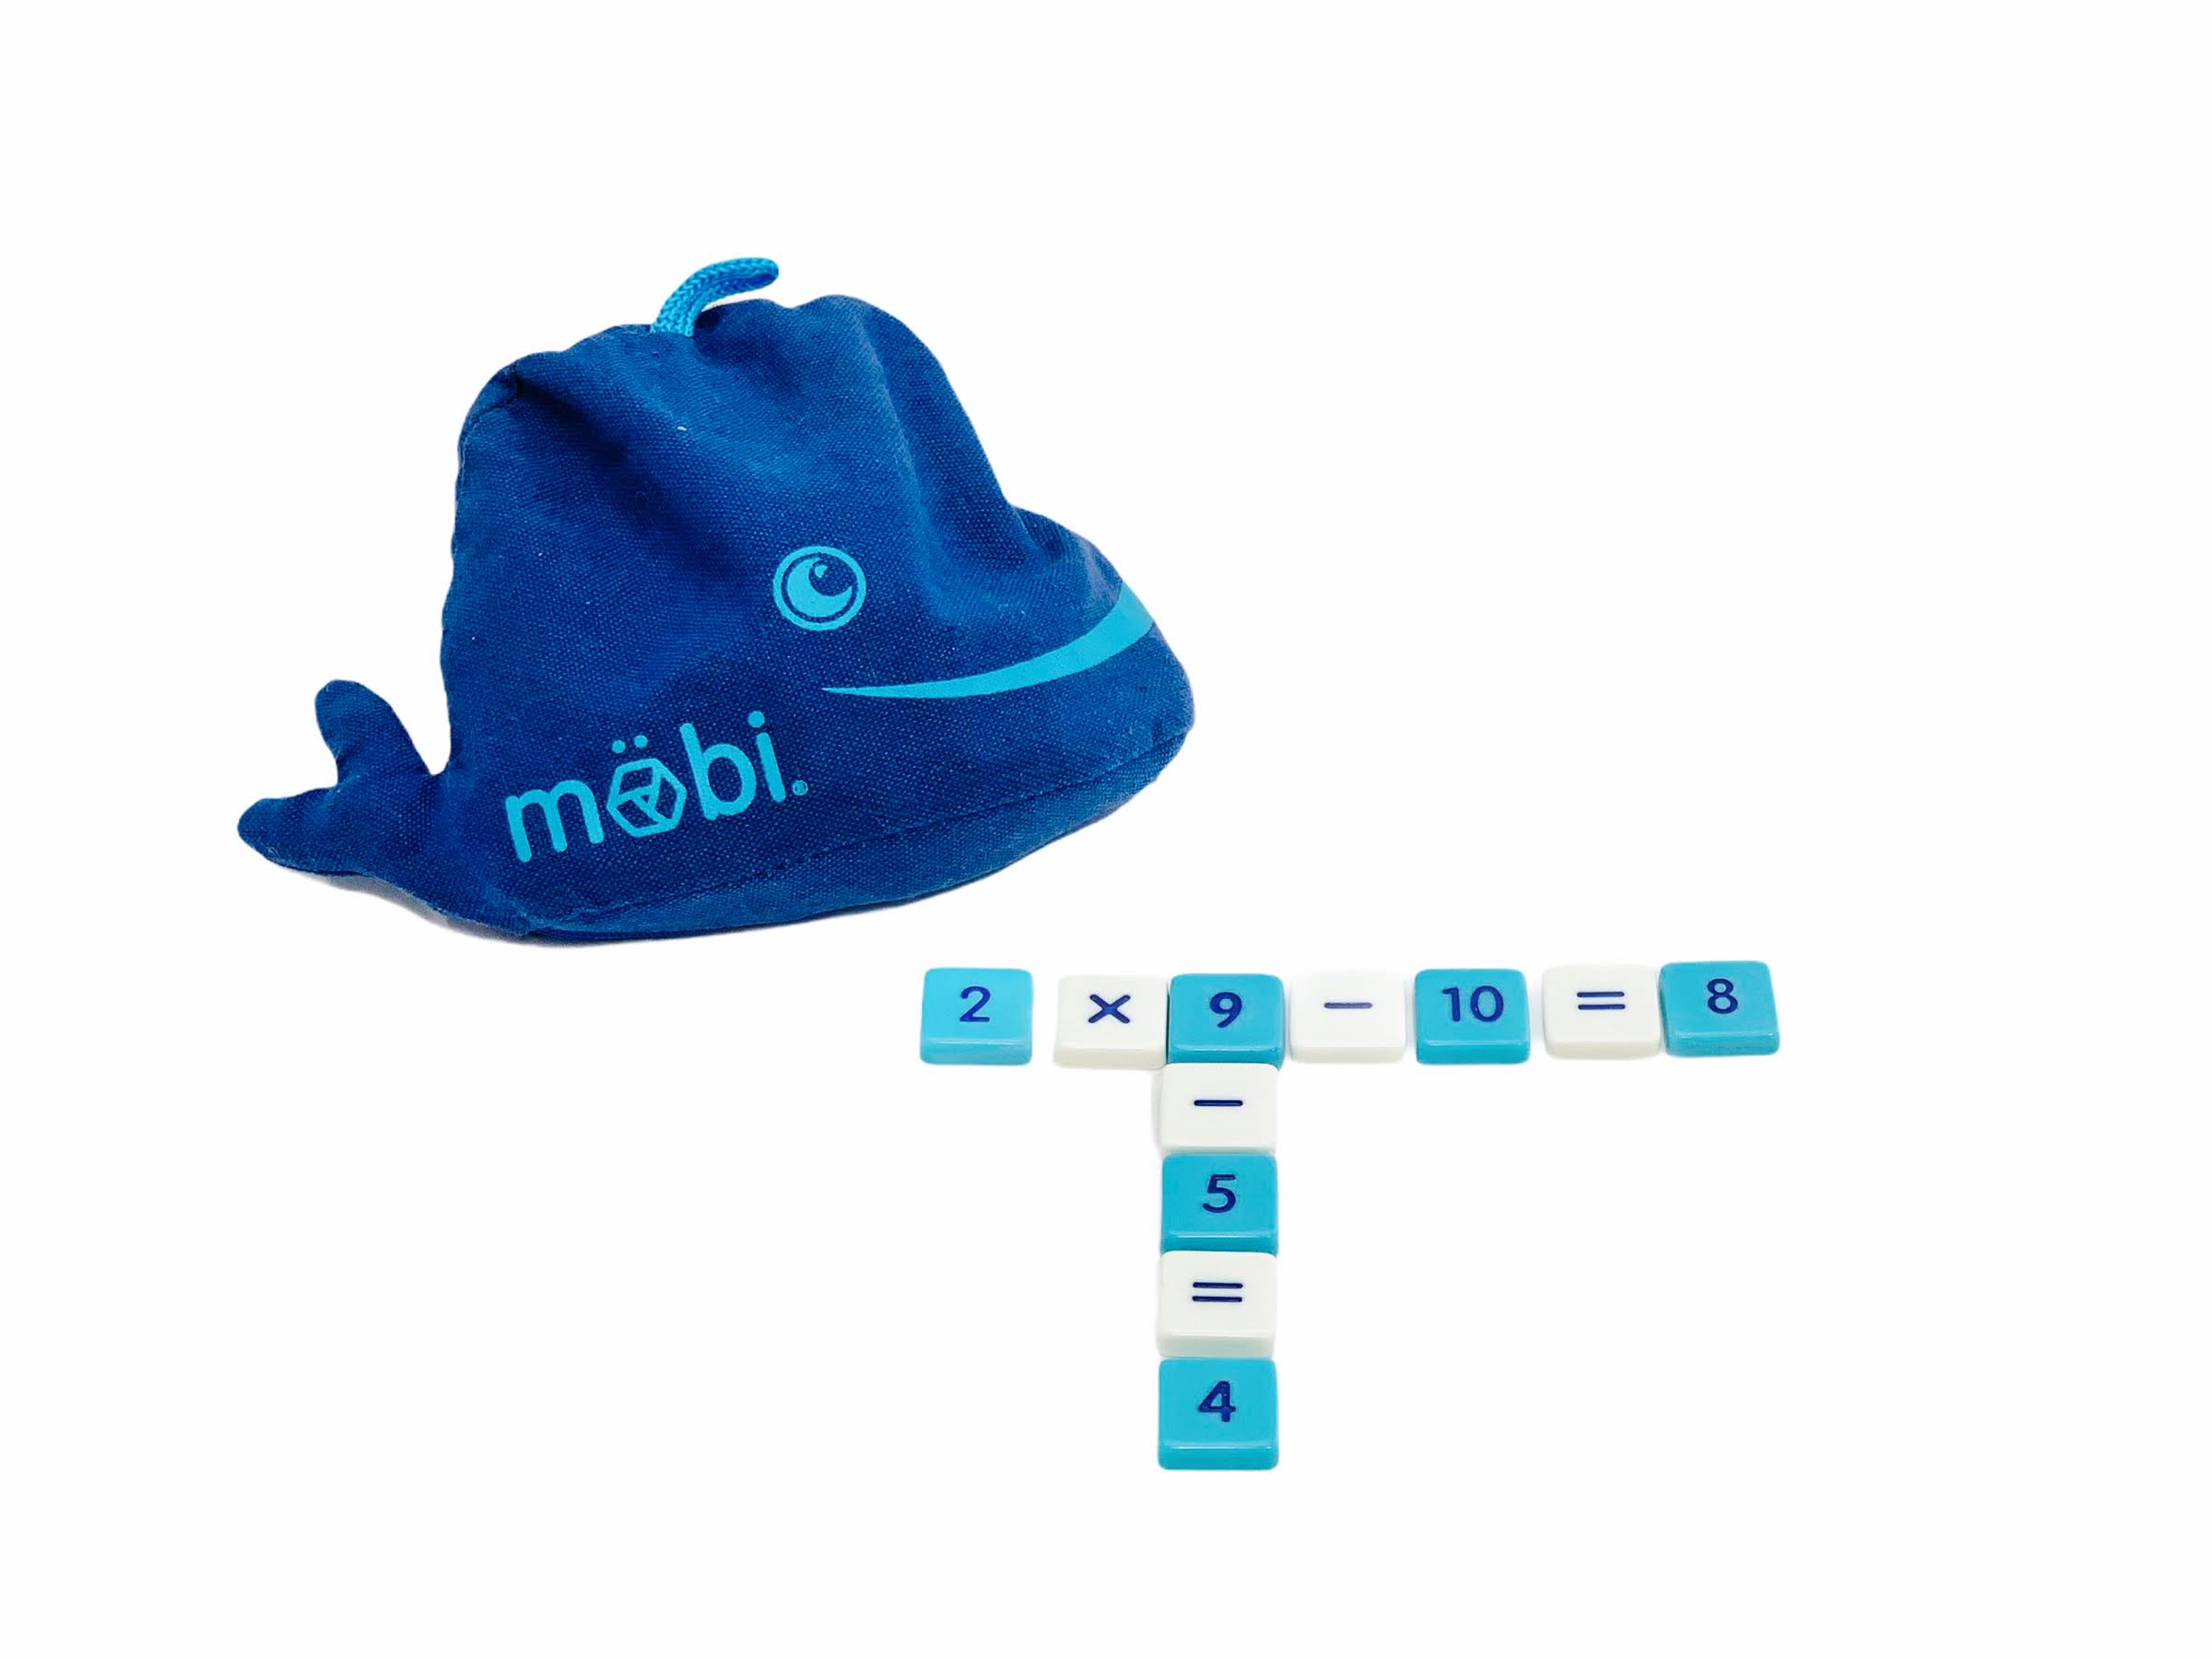 Mobi The Numerical Tile Game In A Whale Pouch